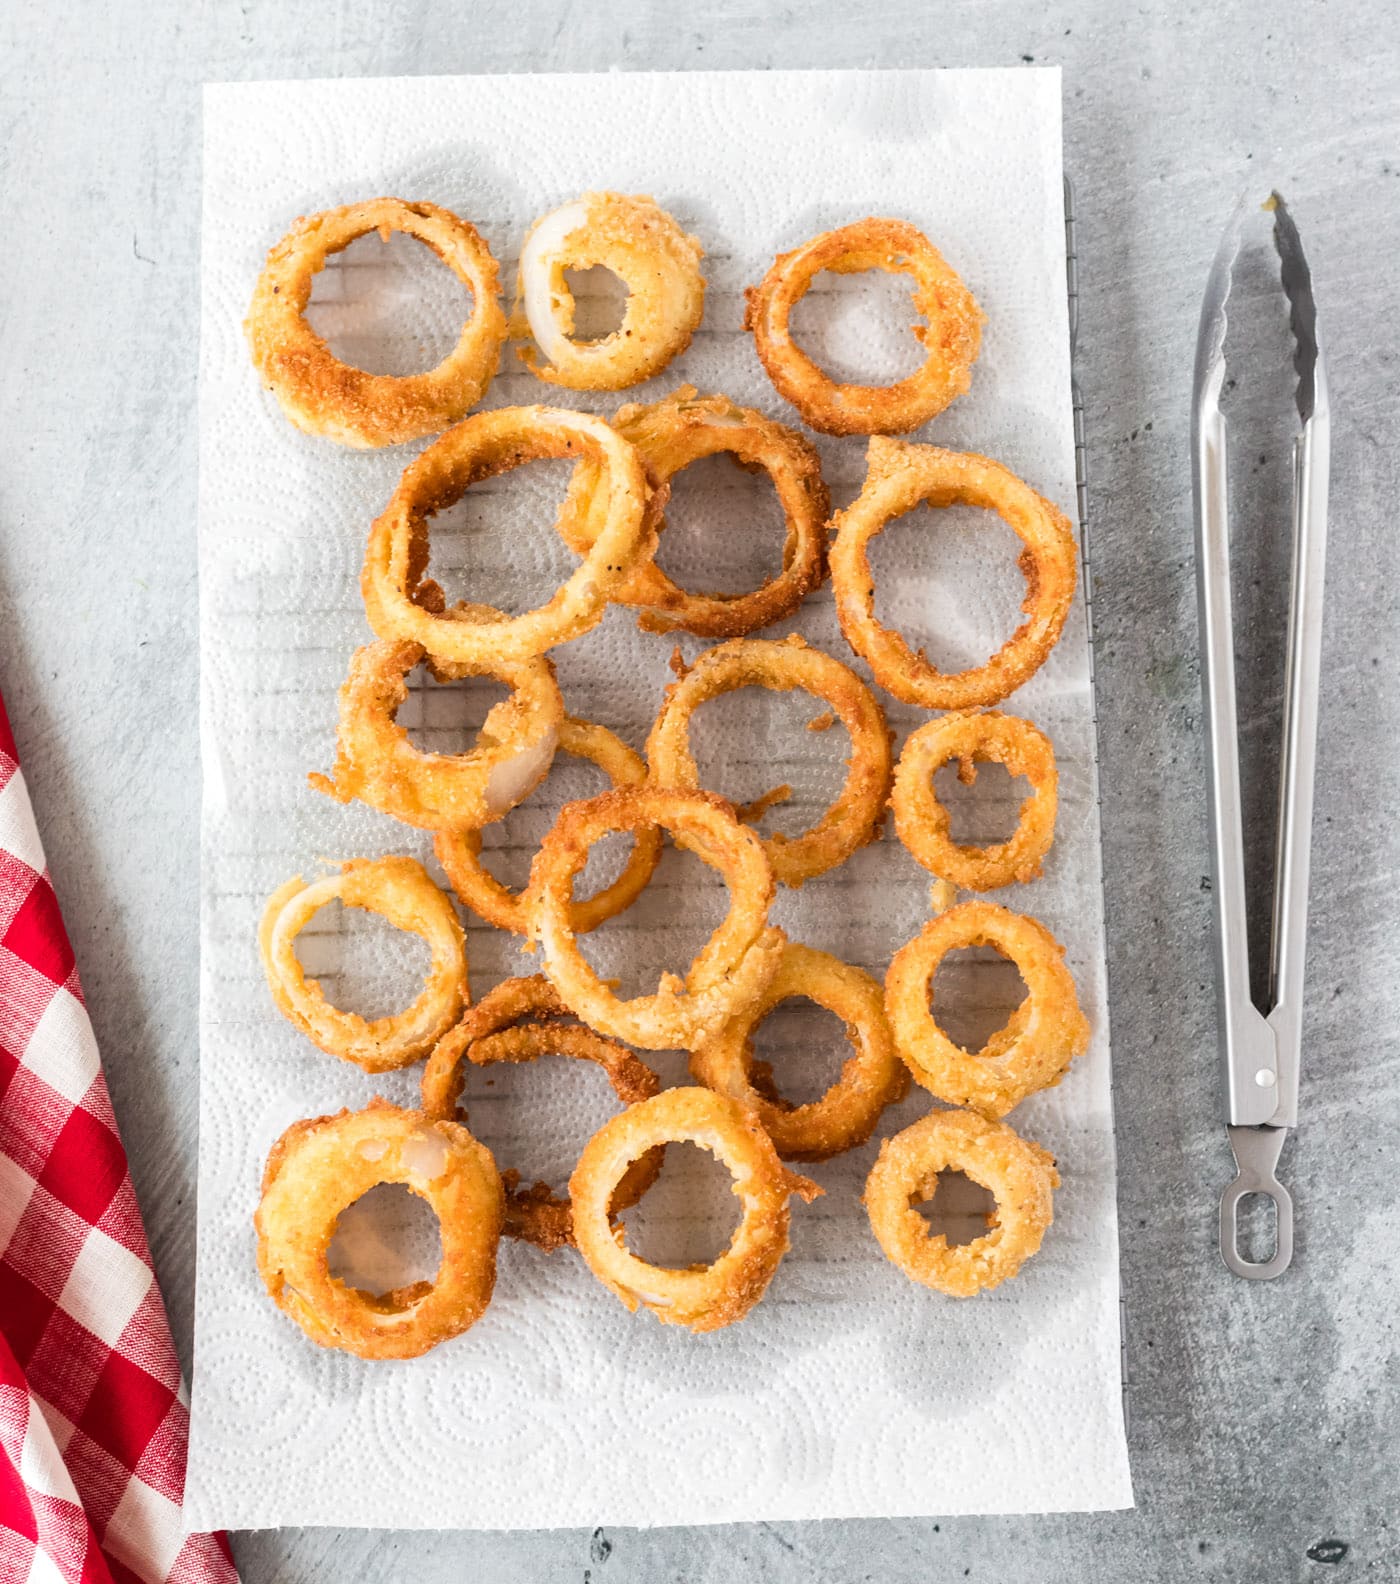 fried onion rings on a paper towel